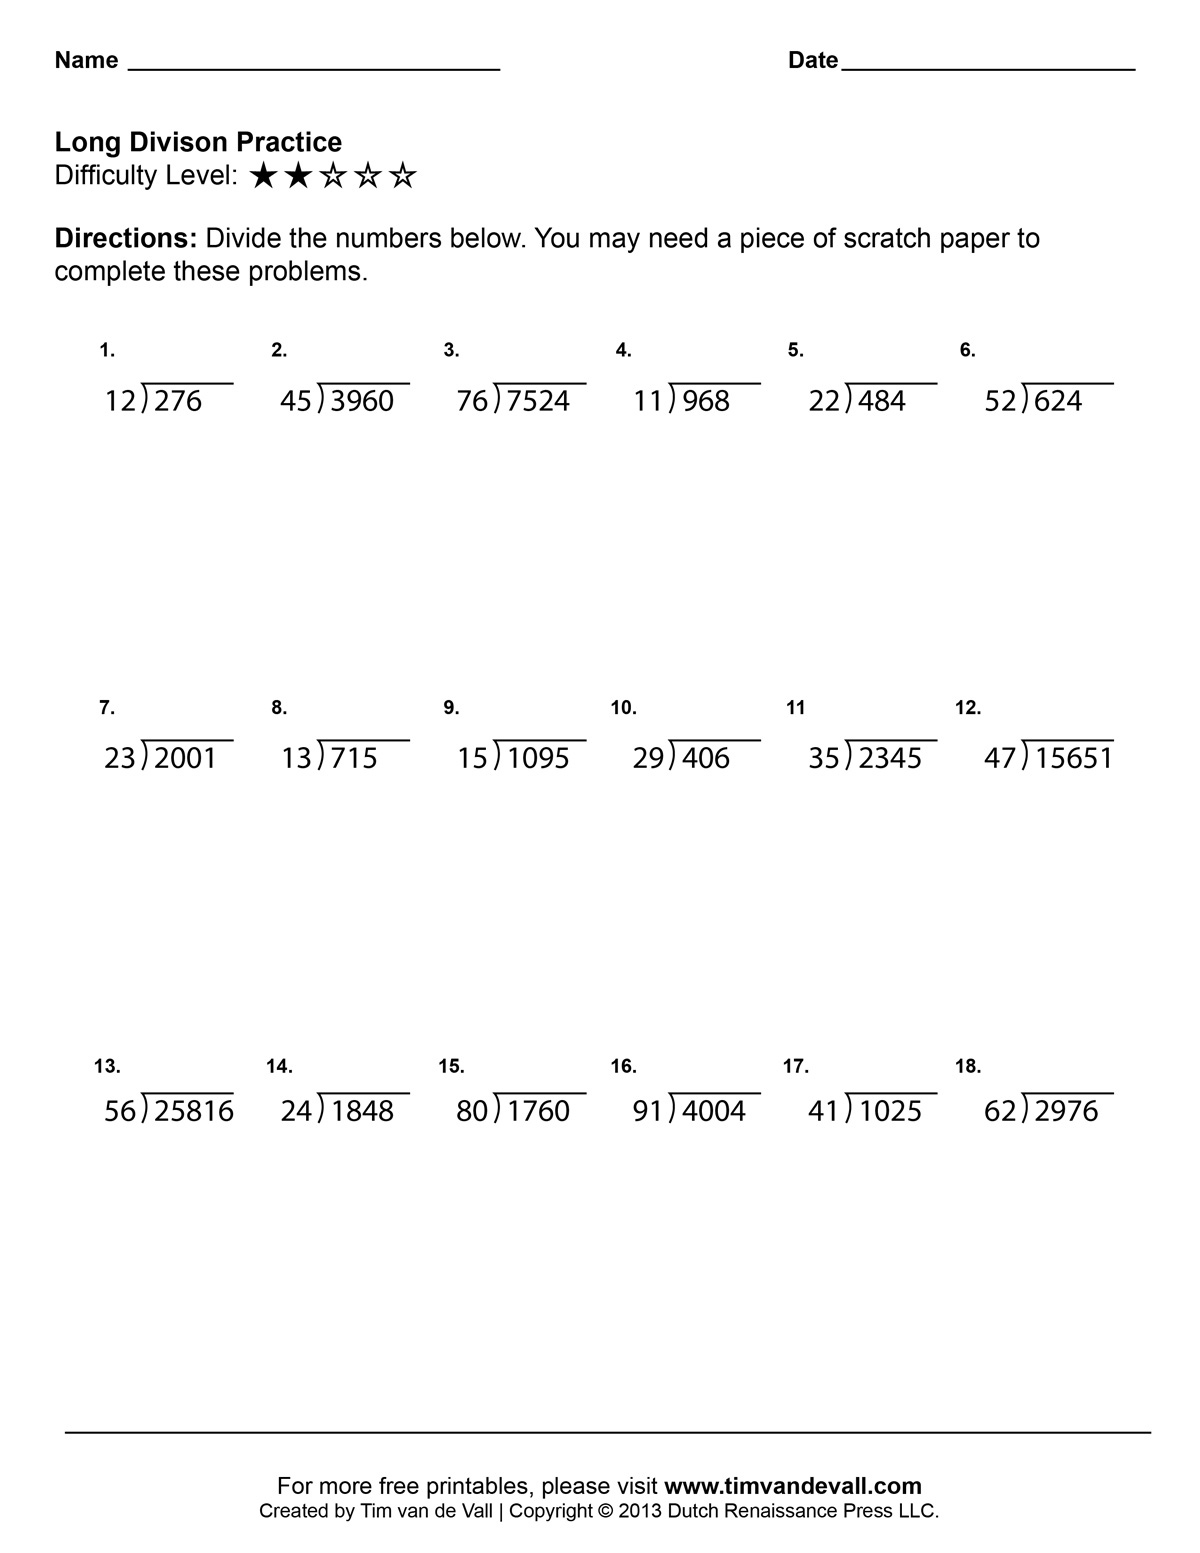 long-division-practice-worksheets-4th-grade-long-division-worksheets